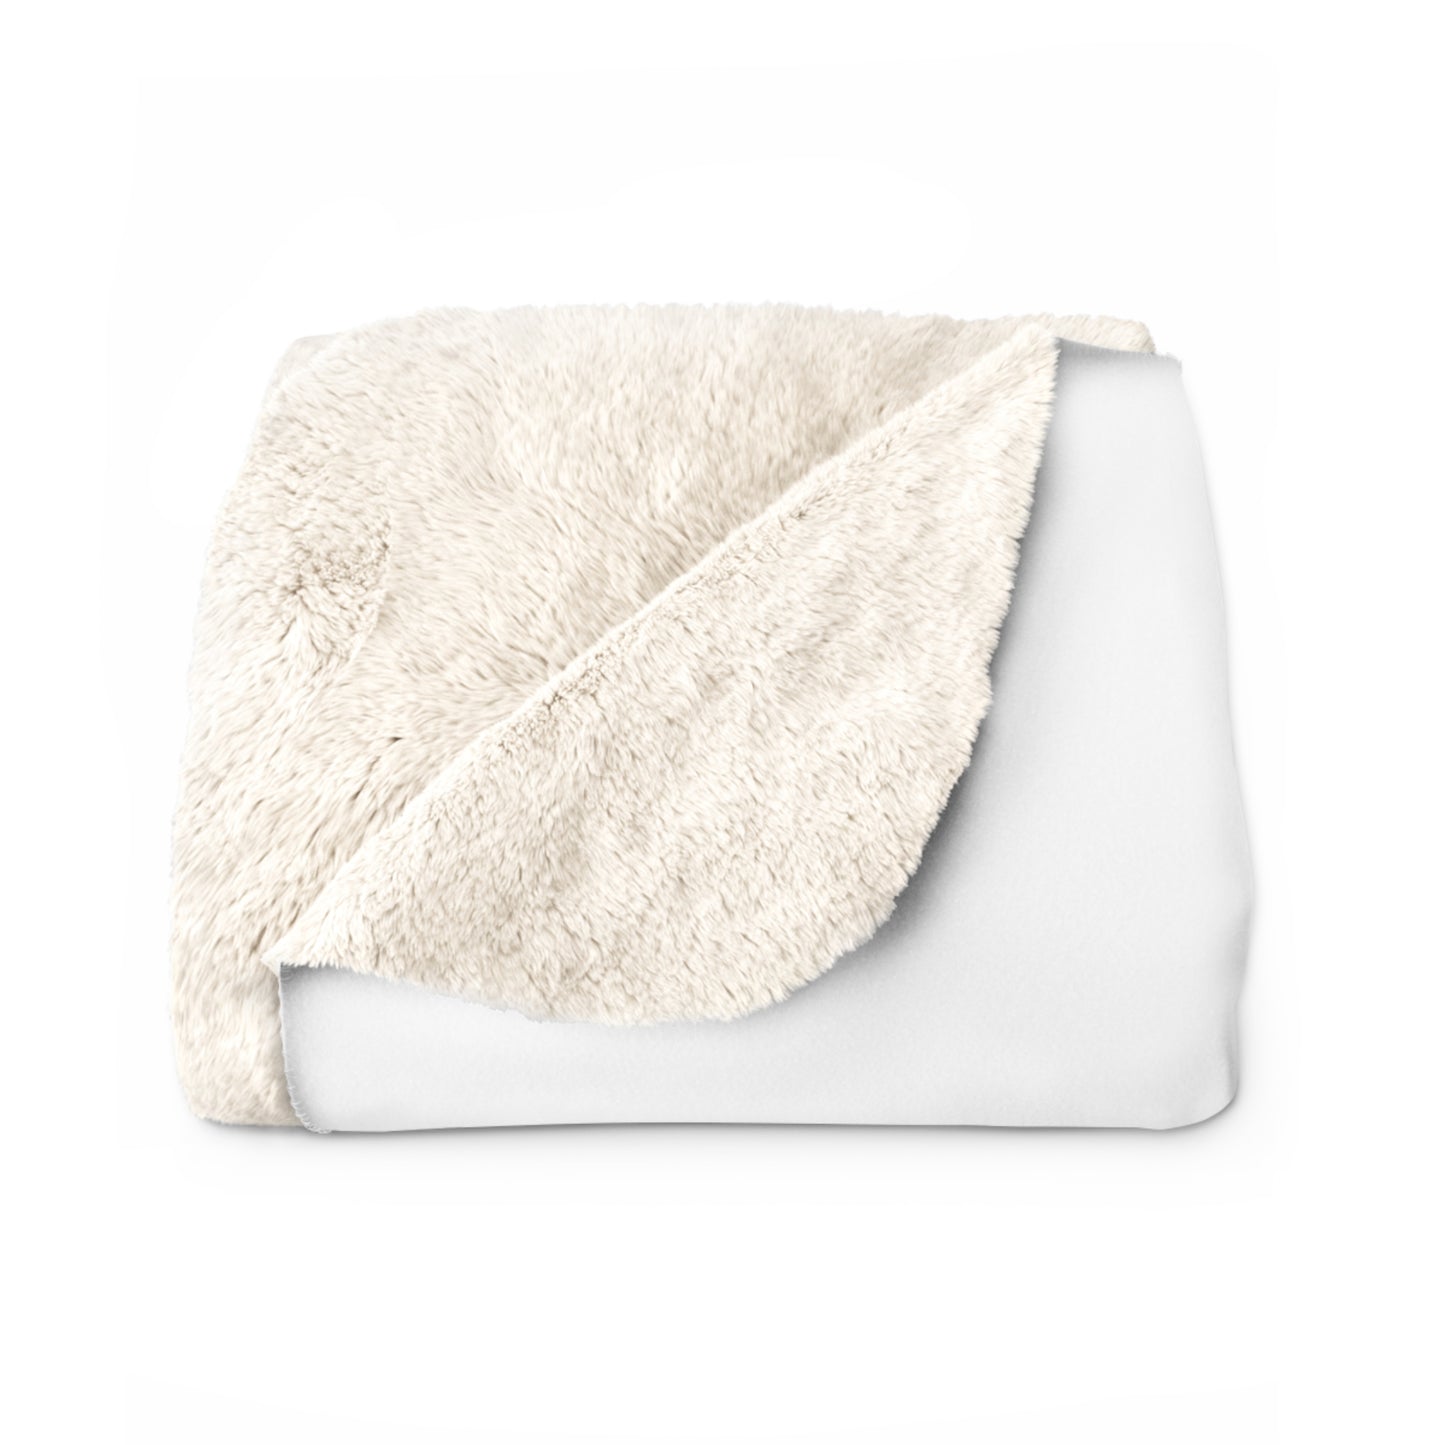 "Dreamy Delights: Luxurious Sherpa Fleece Blanket with Letter D - Unleashing Cozy Elegance and Personalized Comfort for Your Home"